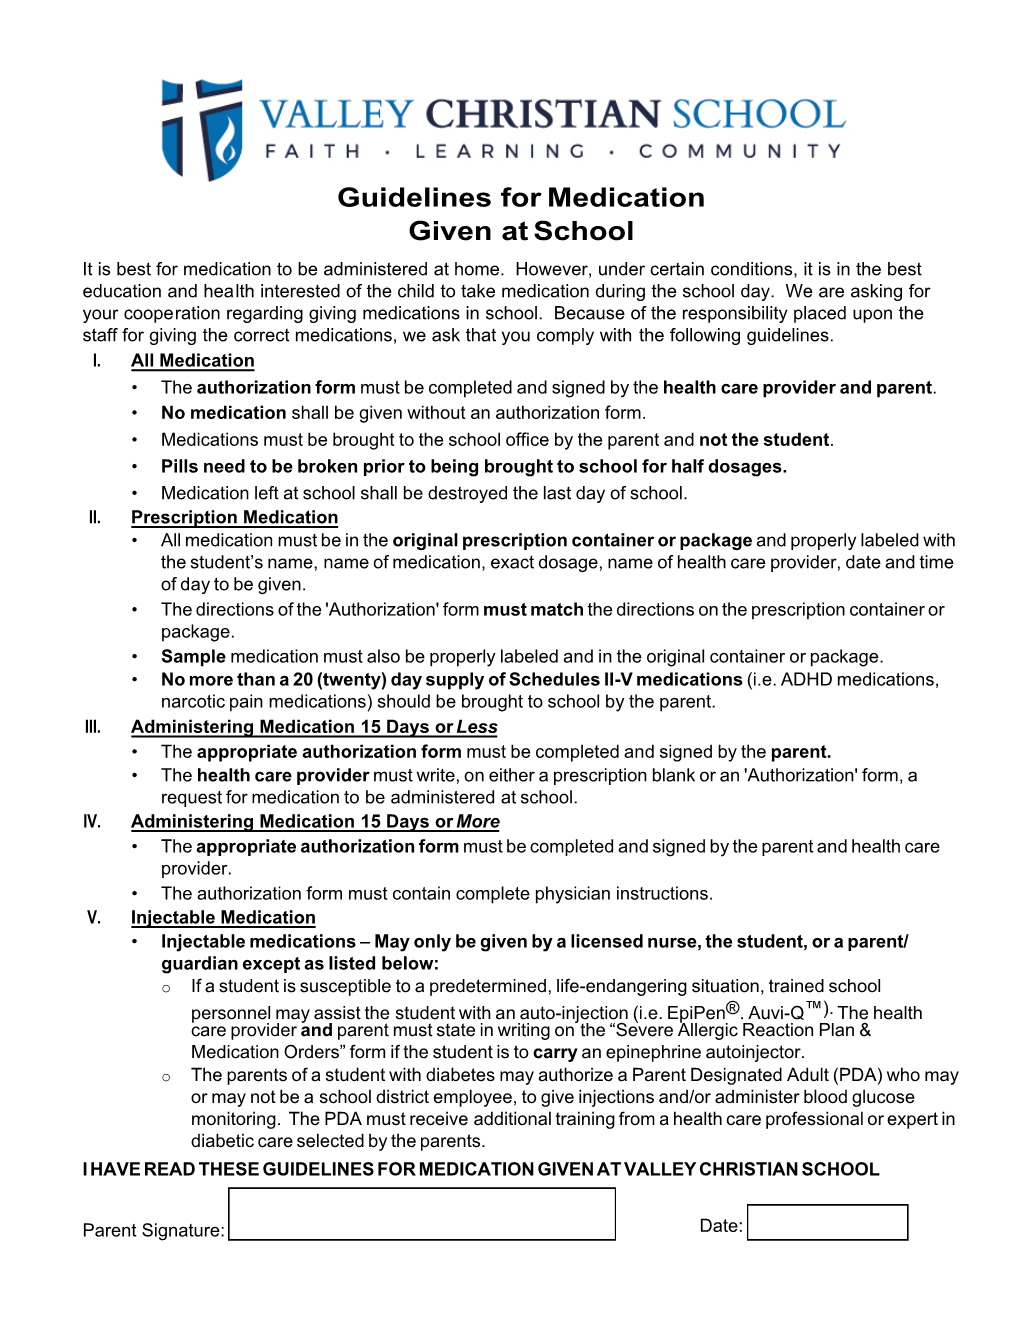 Guidelines for Medication Given at School It Is Best for Medication to Be Administered at Home